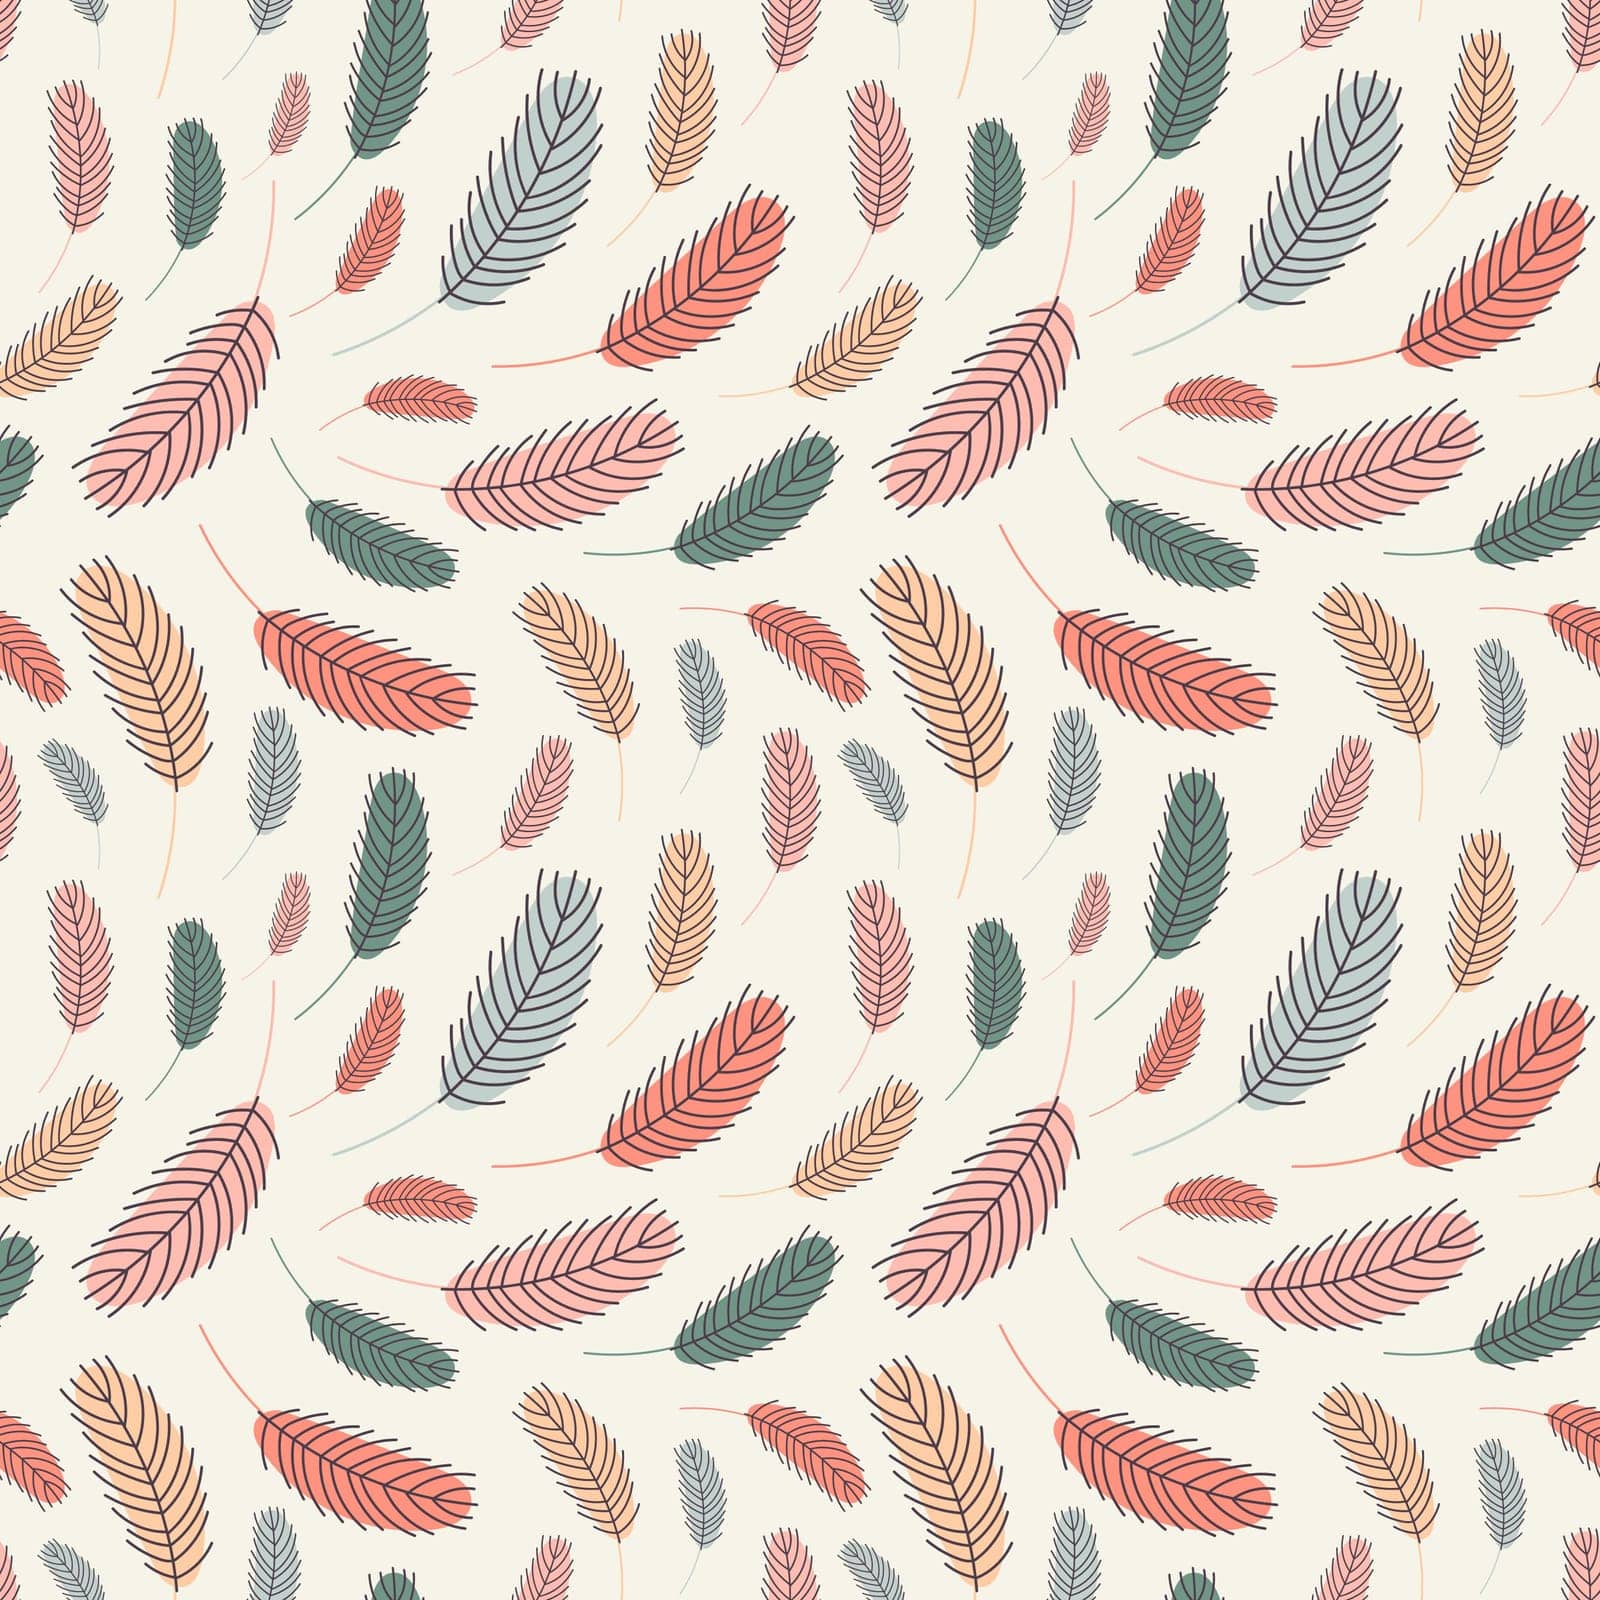 Feathers seamless pattern. Pattern with feathers by Dustick